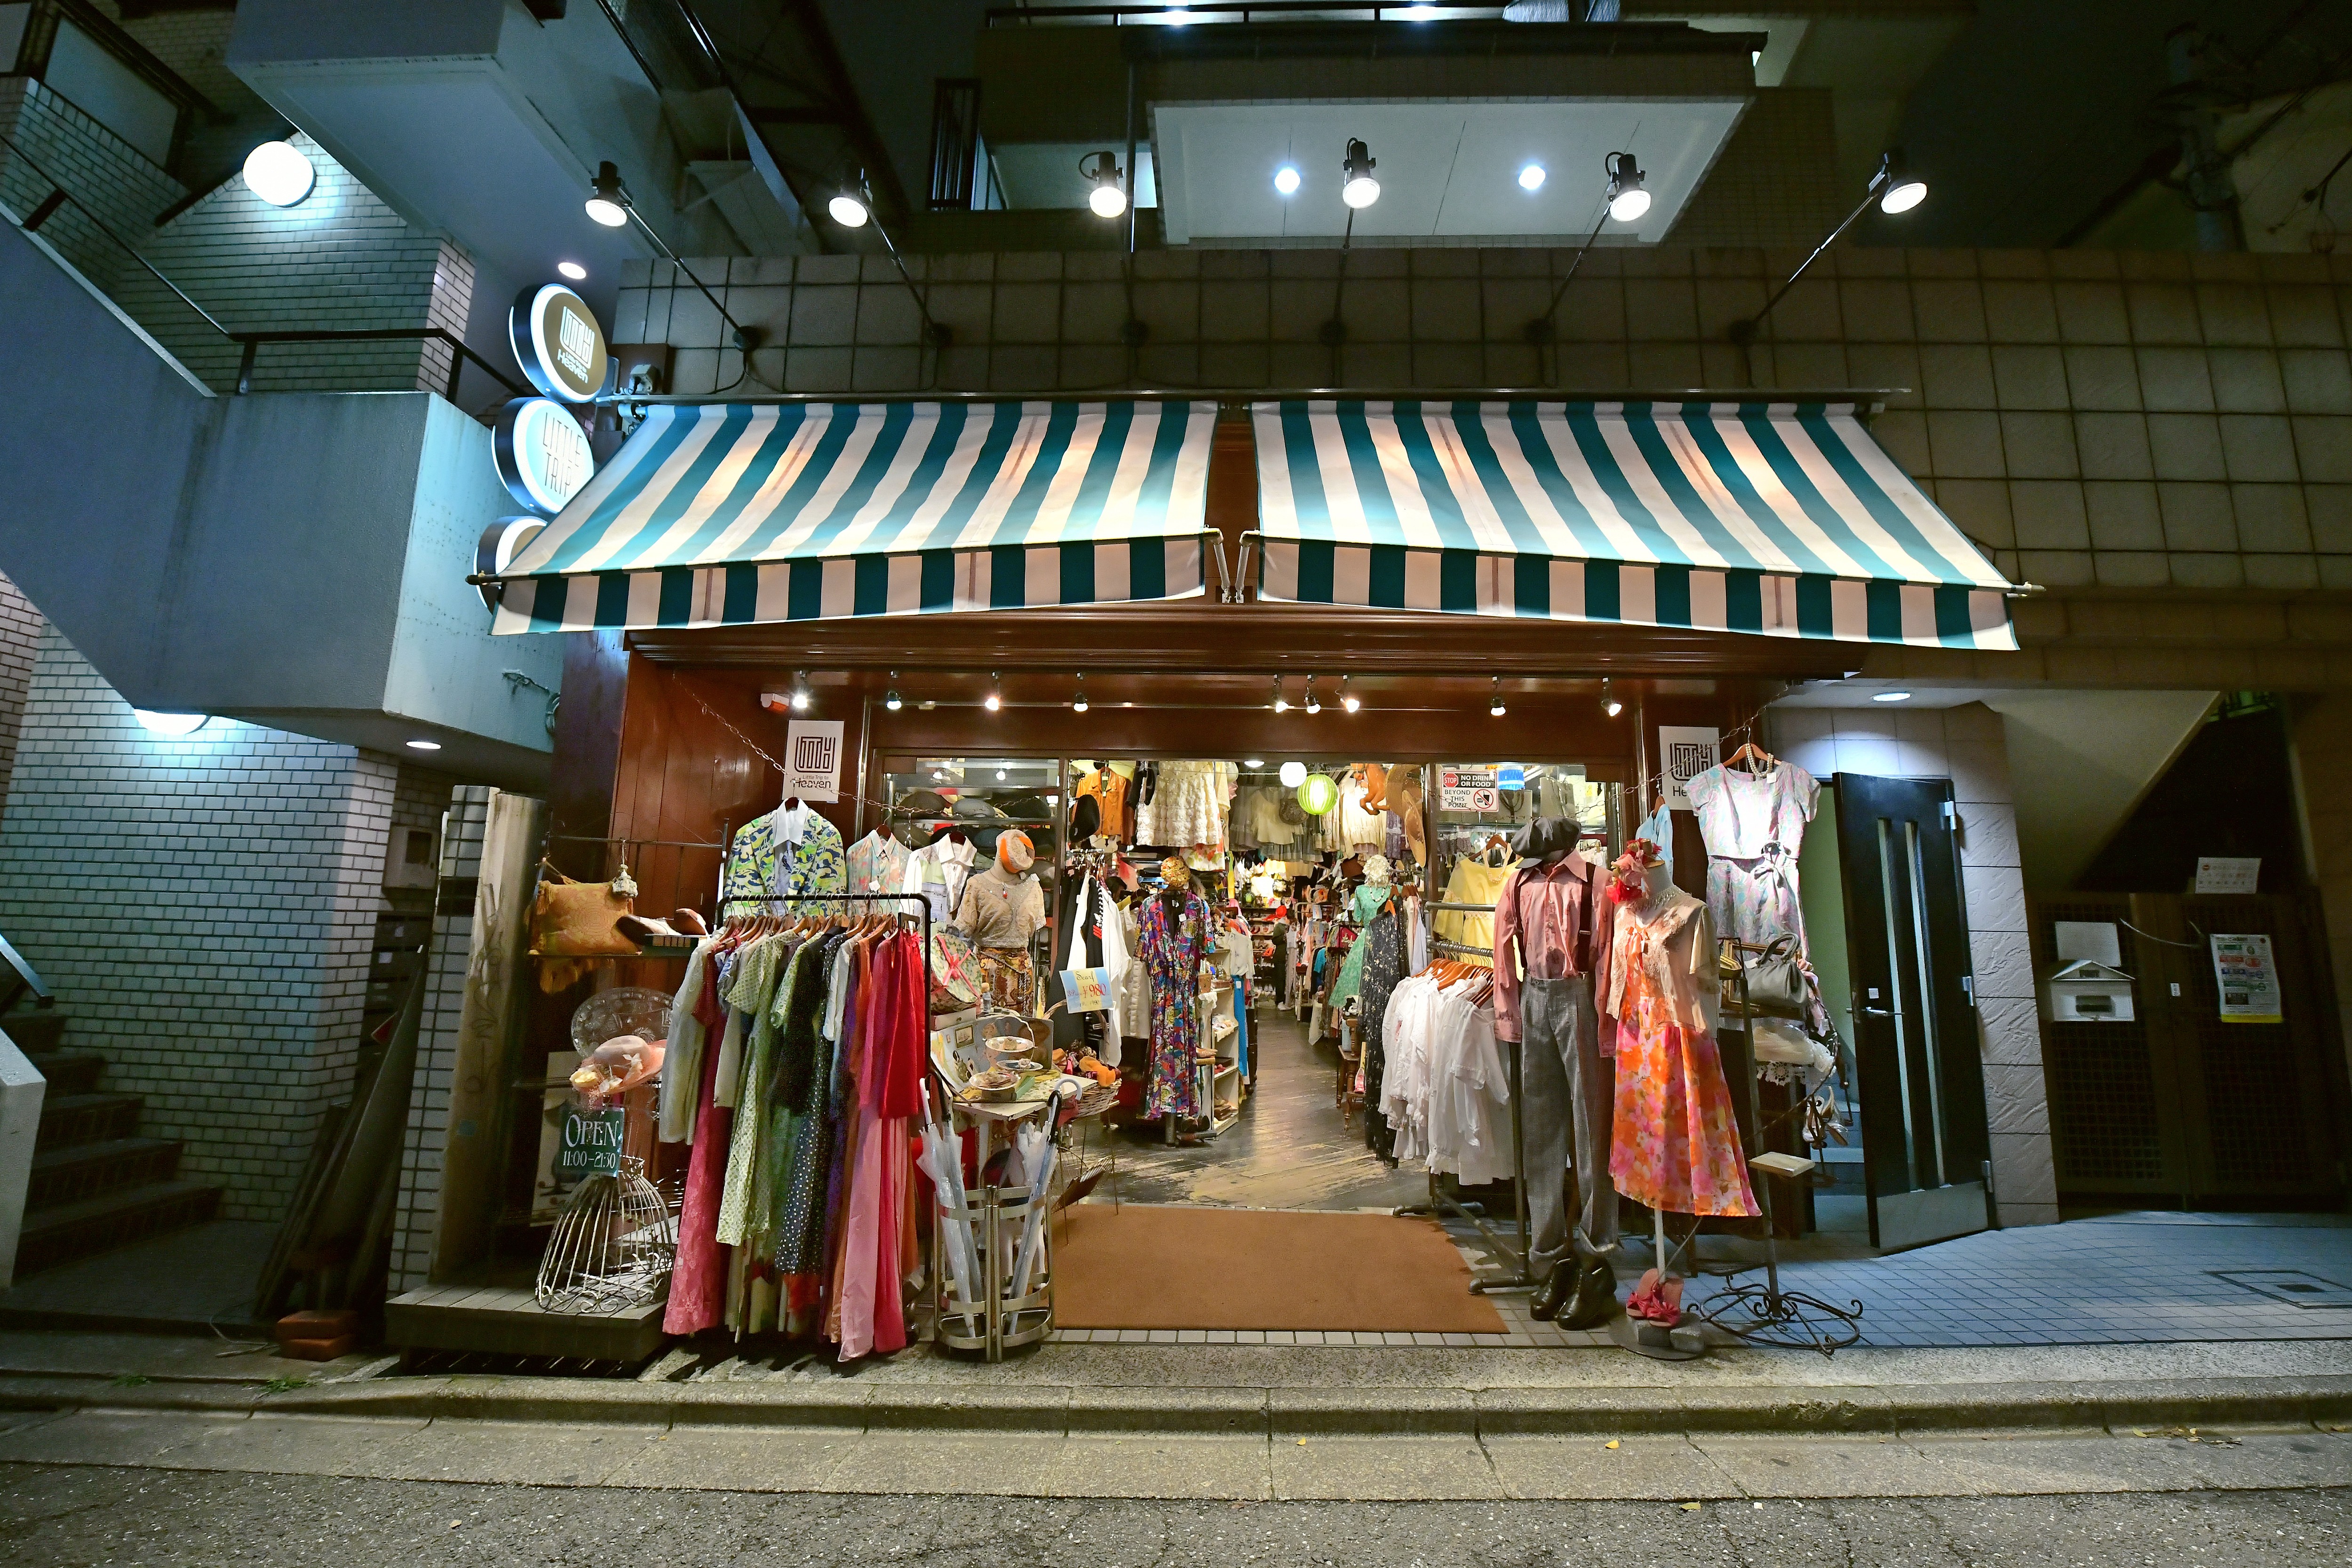 Whether you want high-end boutiques or streetwear stores, Tokyo has you covered. But for those wanting to get away from the tourist-lined streets, these smaller neighbourhoods sprouting hip stores are the place to go